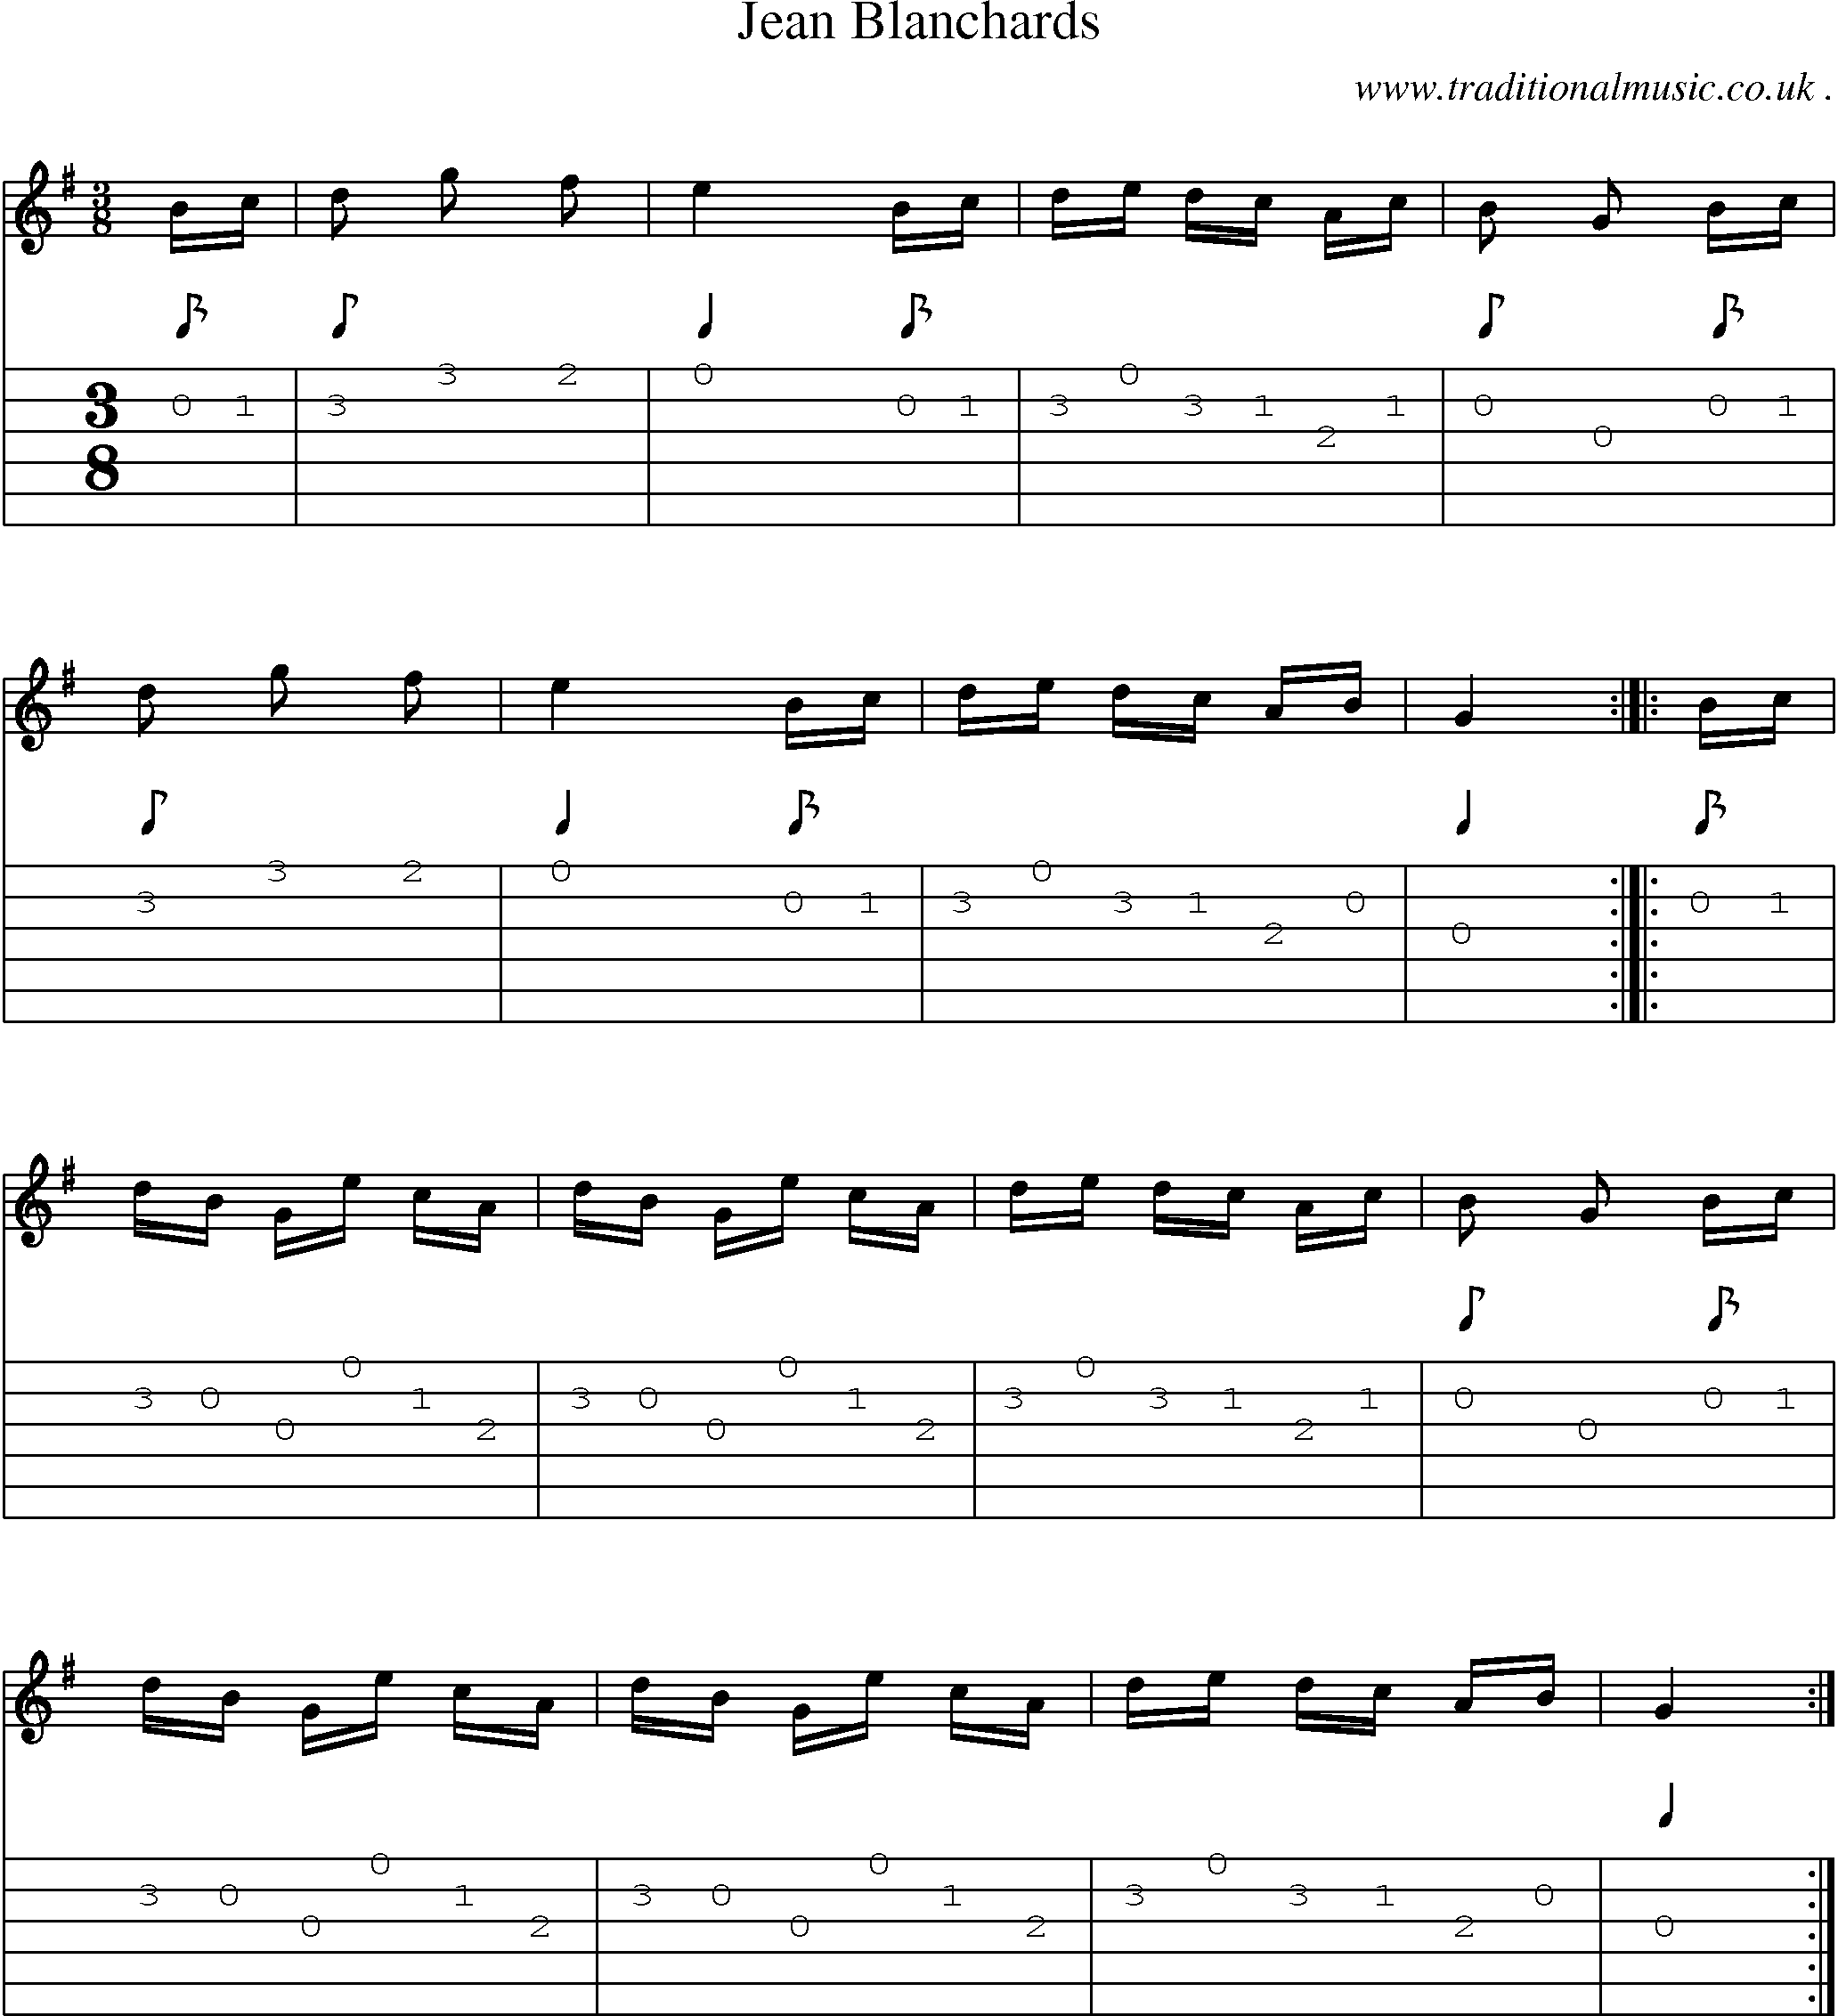 Sheet-Music and Guitar Tabs for Jean Blanchards